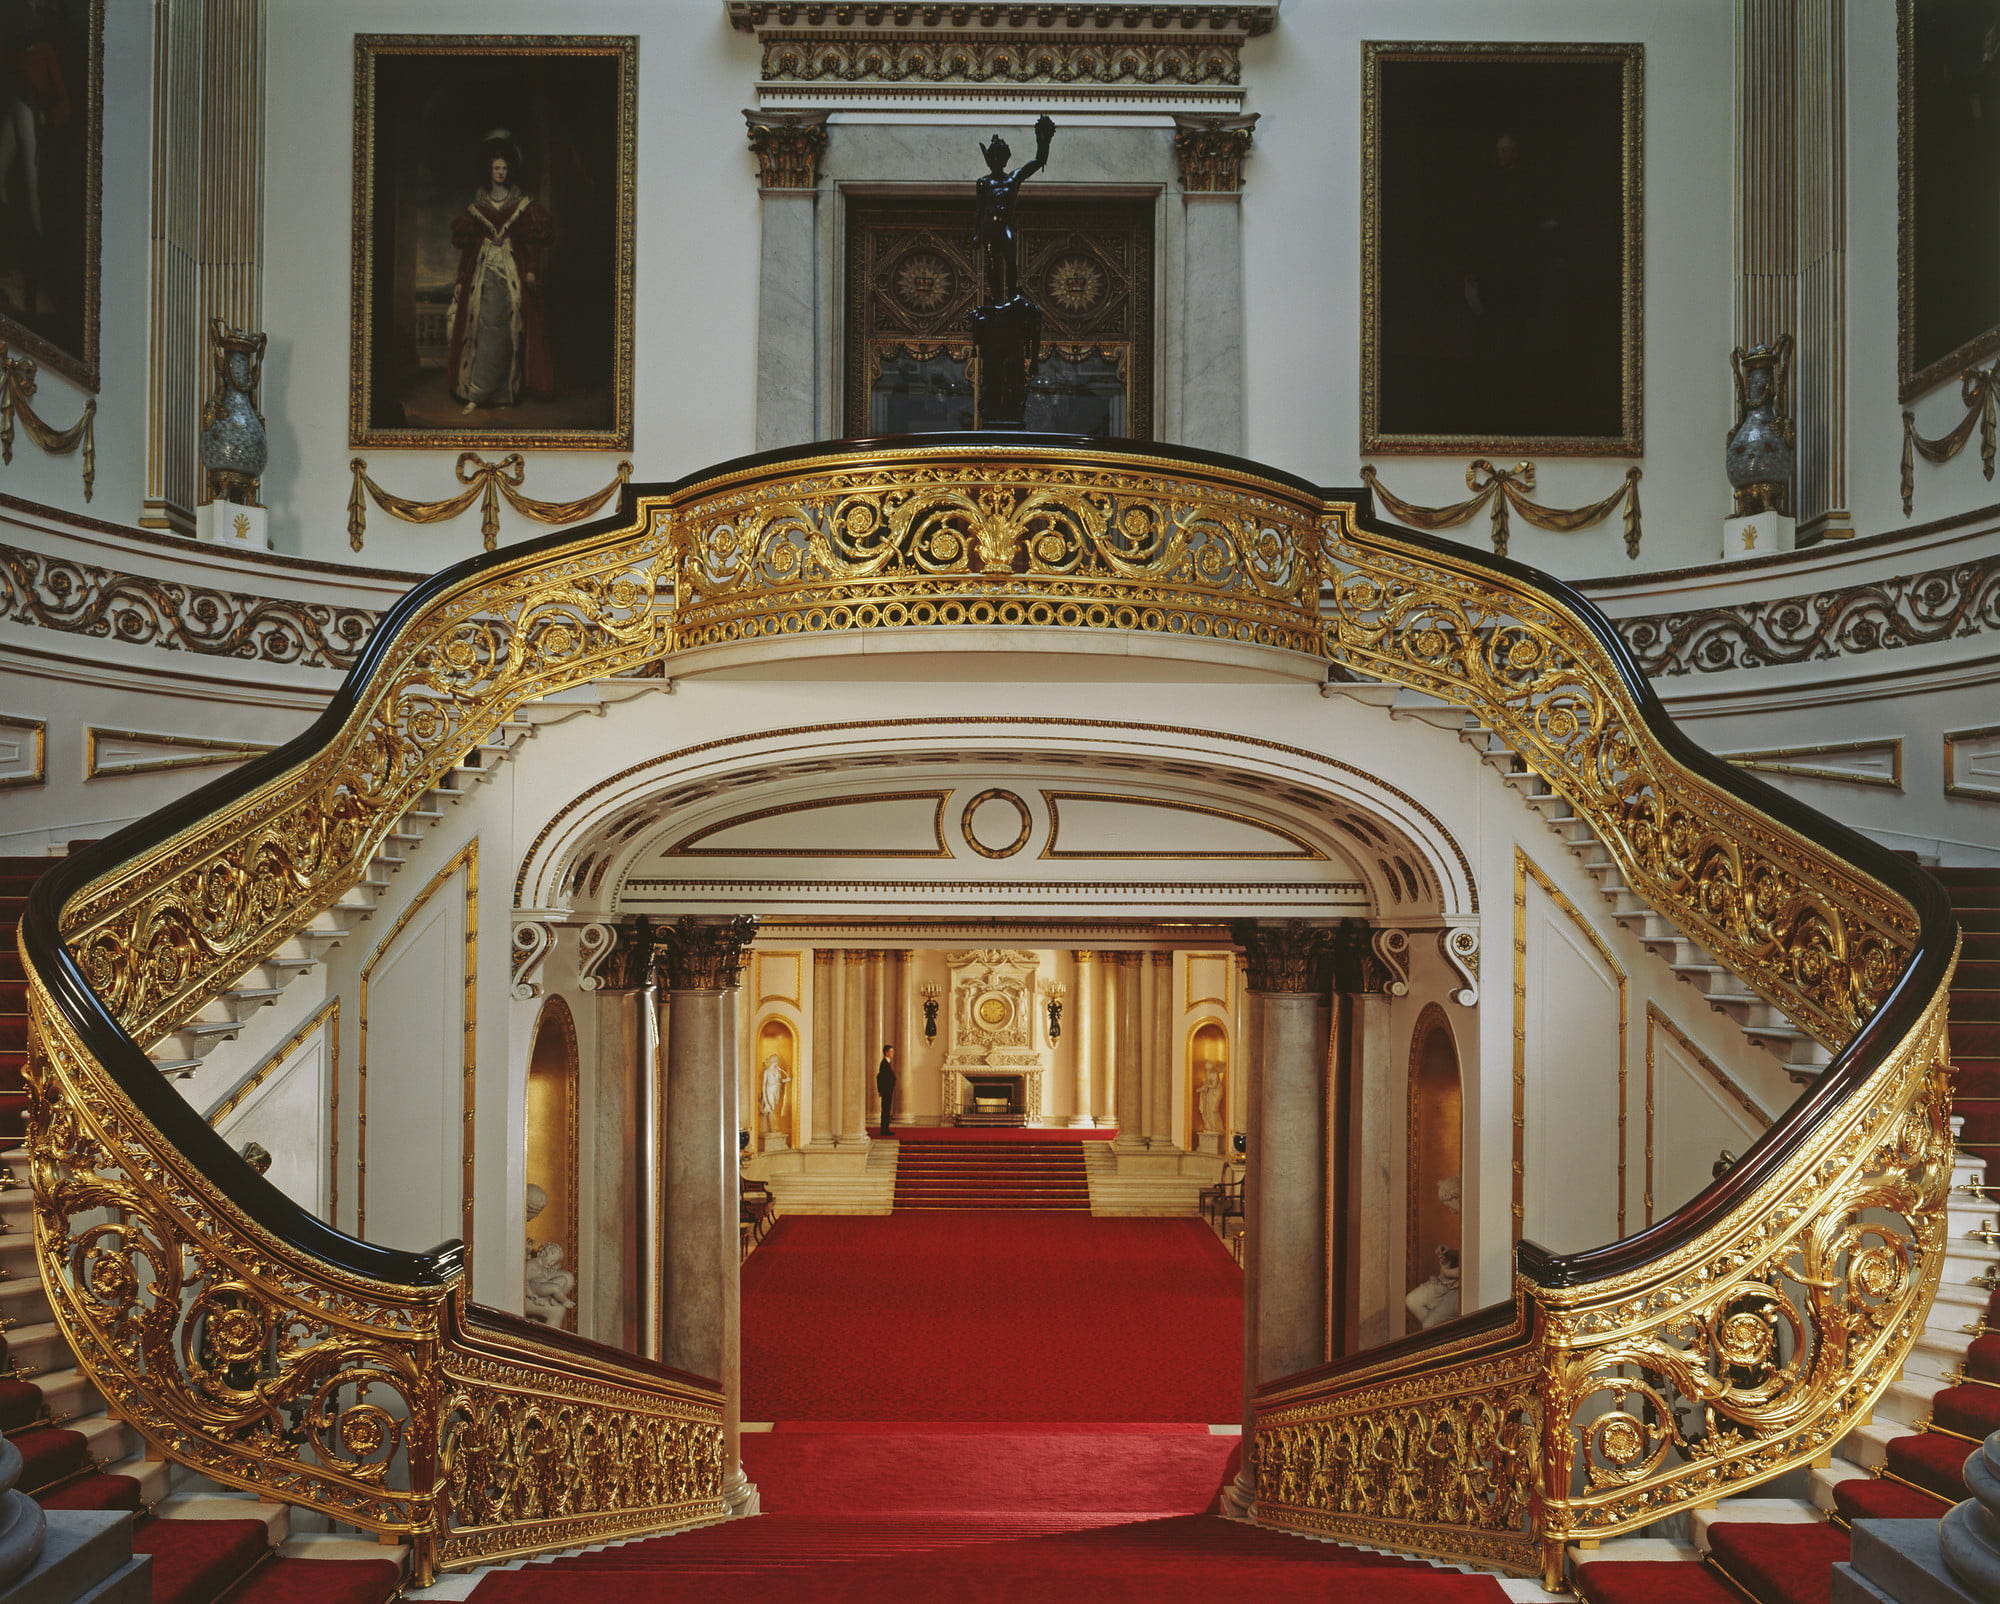 Grand staircase in Buckingham Palace, with a red carpet going down the corridor, golden bannisters and statues.